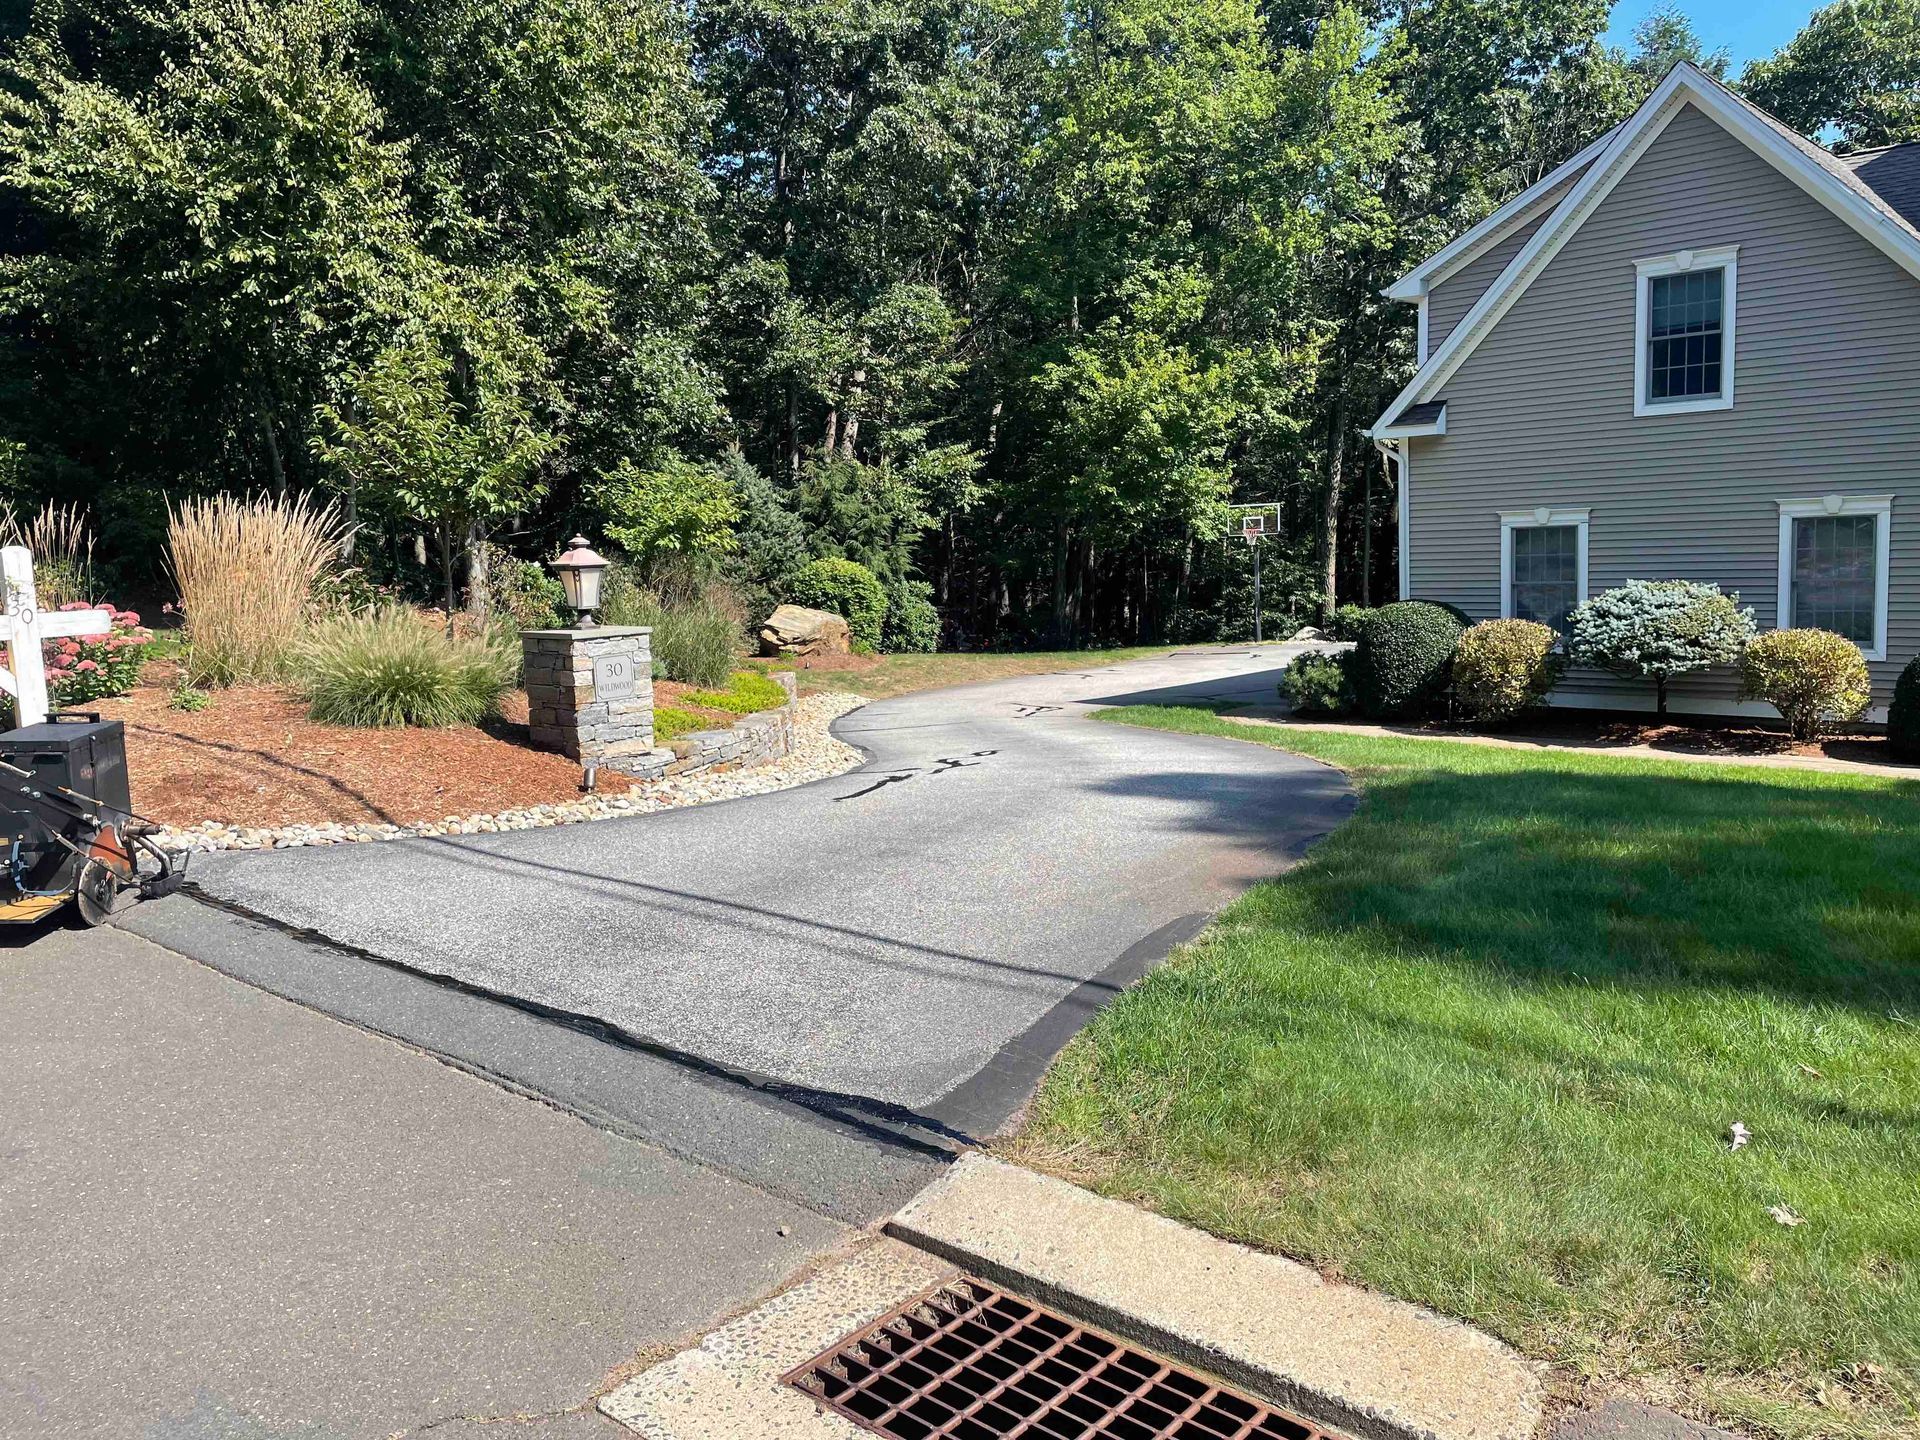 Crack filling older driveway in need or repair, Connecticut Landscape Solutions